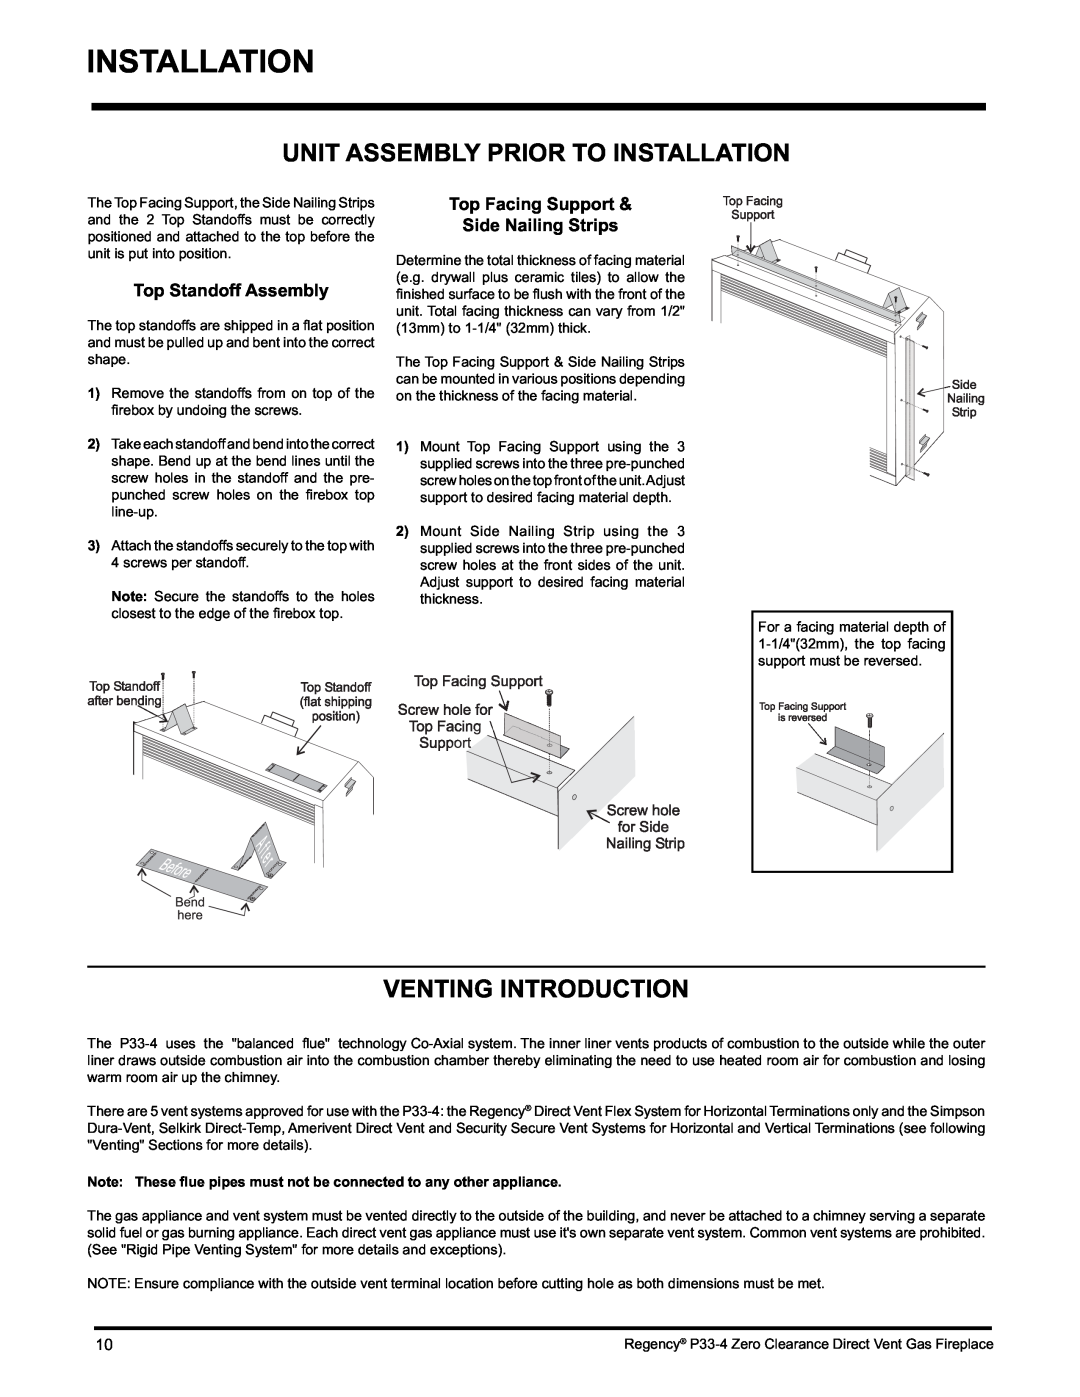 Regency P33-LP4 installation manual Unit Assembly Prior To Installation, Venting Introduction, Top Standoff Assembly 